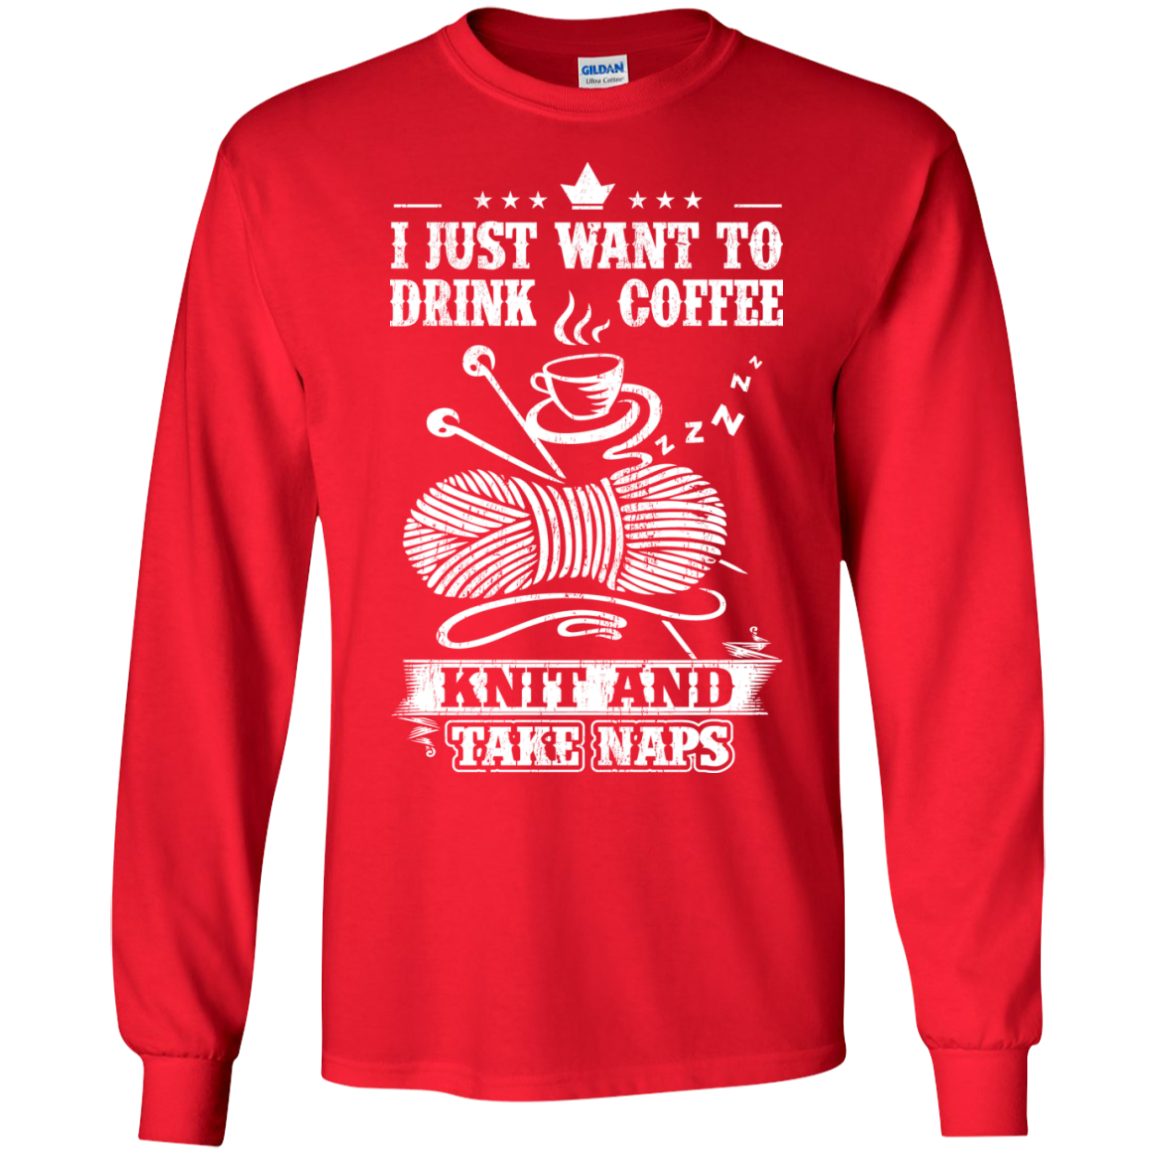 Coffee-Knit-Nap Long Sleeve Ultra Cotton T-Shirt - Crafter4Life - 9